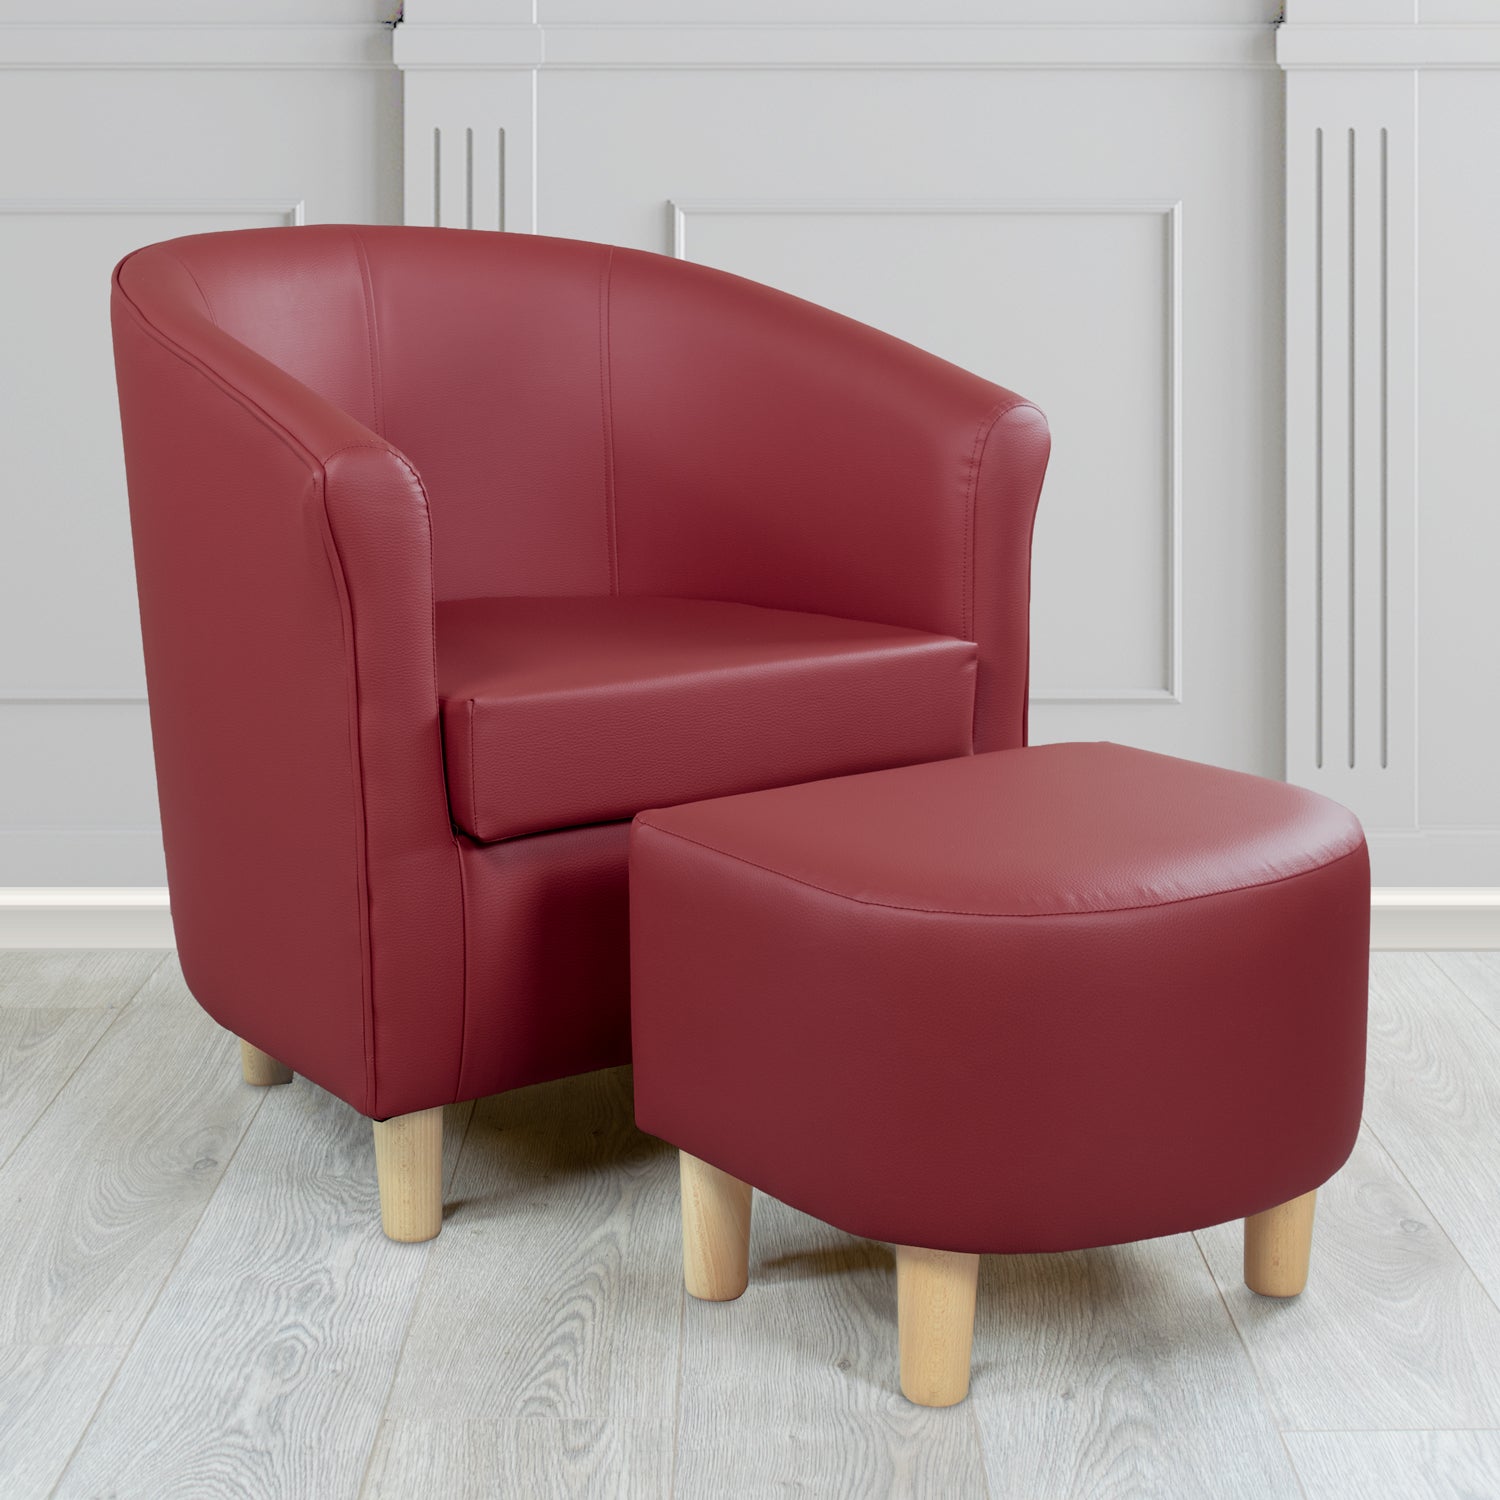 Tuscany Just Colour Mulled Wine Faux Leather Tub Chair with Footstool Set - The Tub Chair Shop